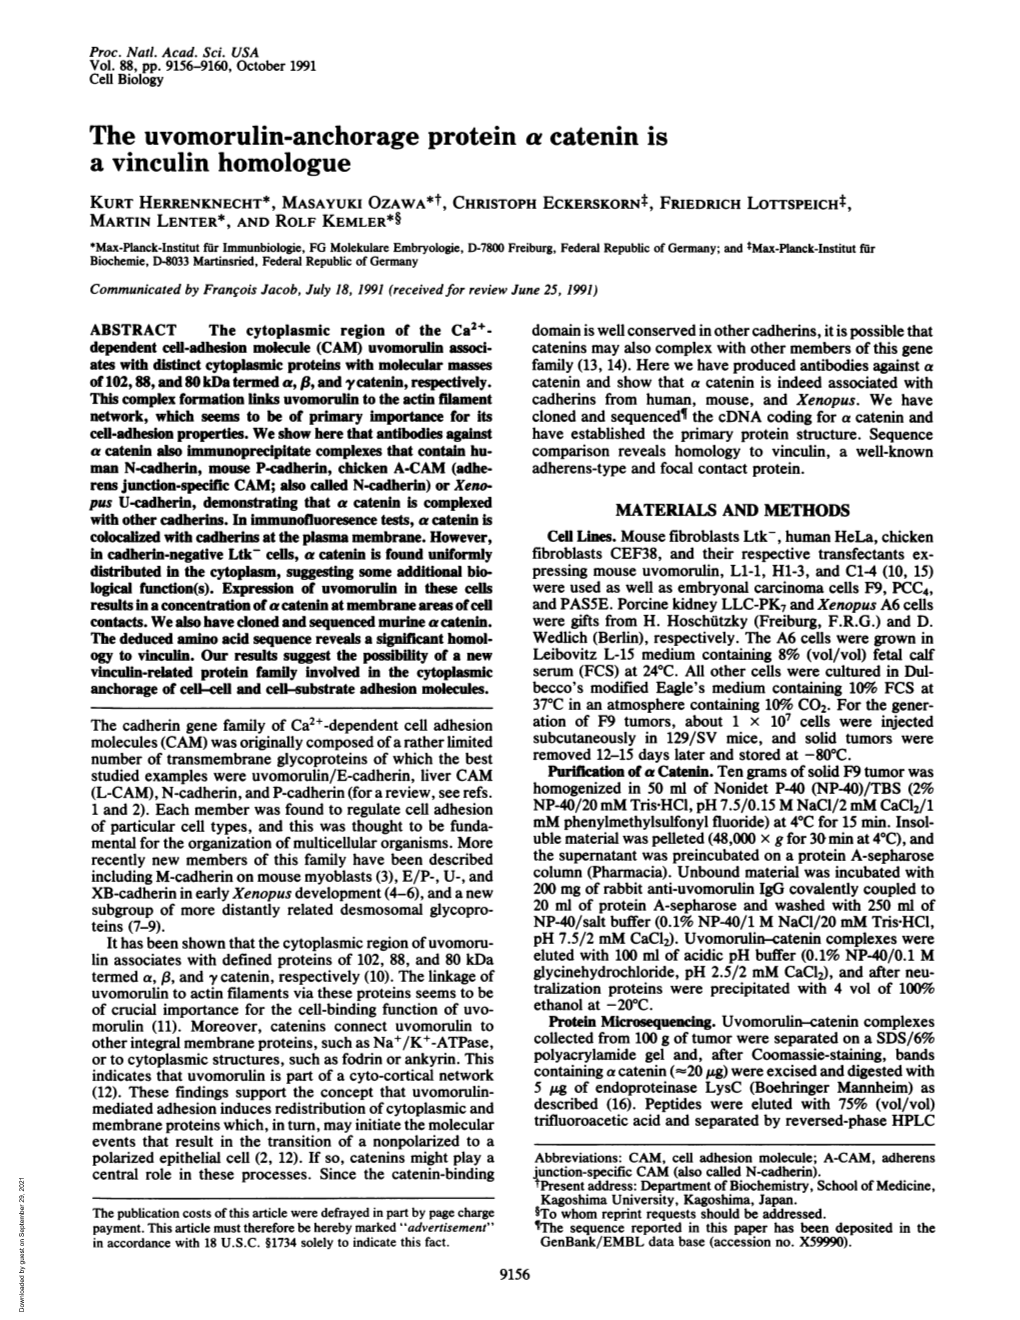 The Uvomorulin-Anchorage Protein a Catenin Is a Vinculin